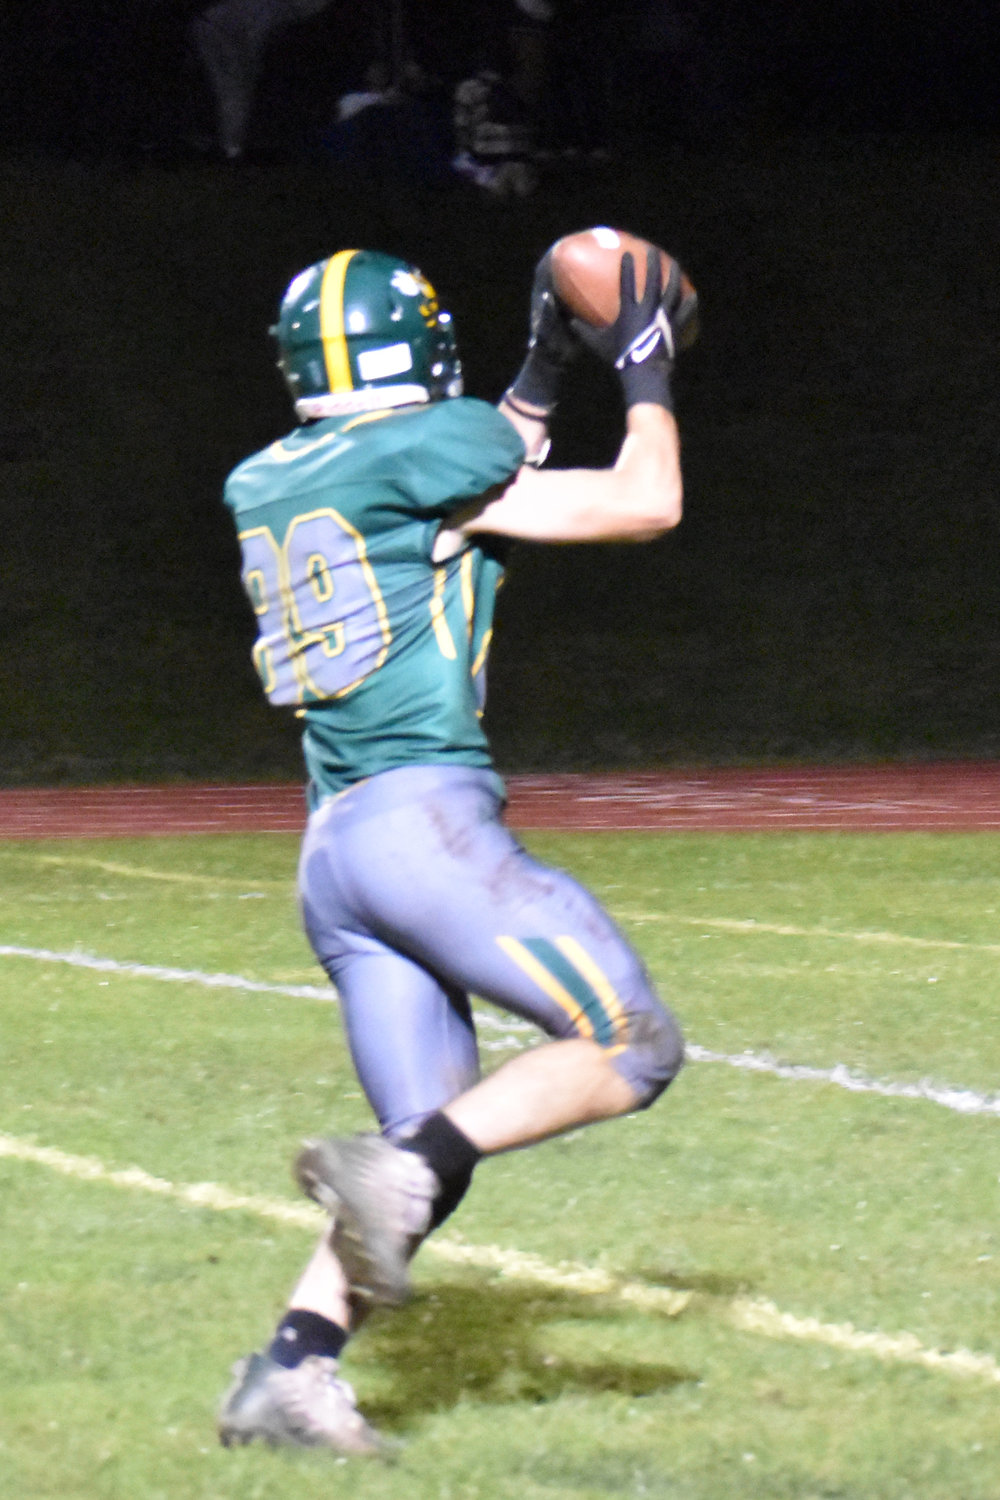 Josh Warming received four passes for 44 yards, including this 24 yard touchdown.